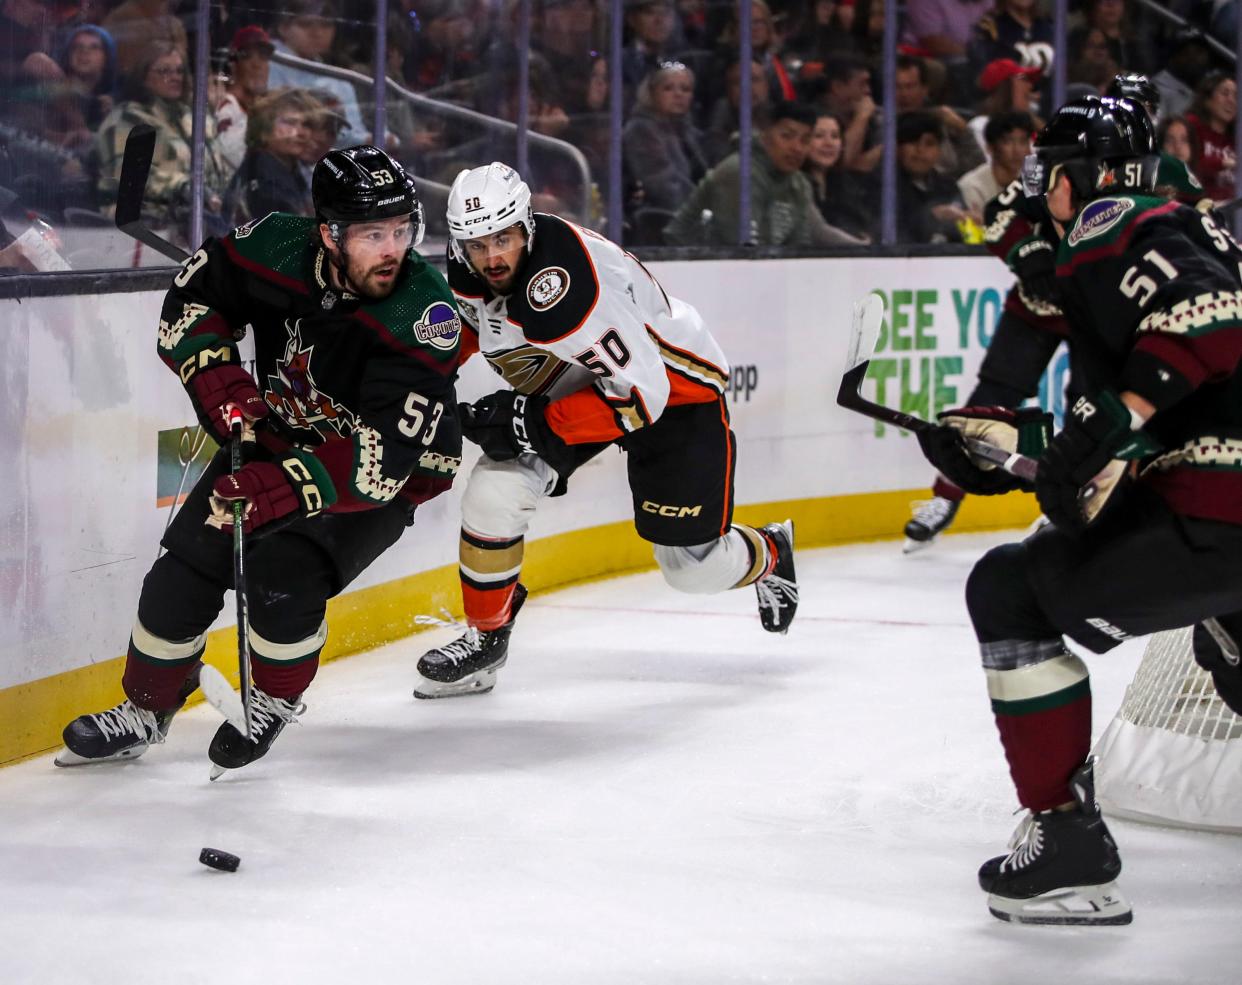 Arizona Coyotes left wing Michael Carcone (53) takes the puck around behind the net with Anaheim Ducks forward Bo Groulx (50) in chase during the first period of their exhibition game at Acrisure Arena in Palm Desert, Calif., Sunday, Oct. 1, 2023.